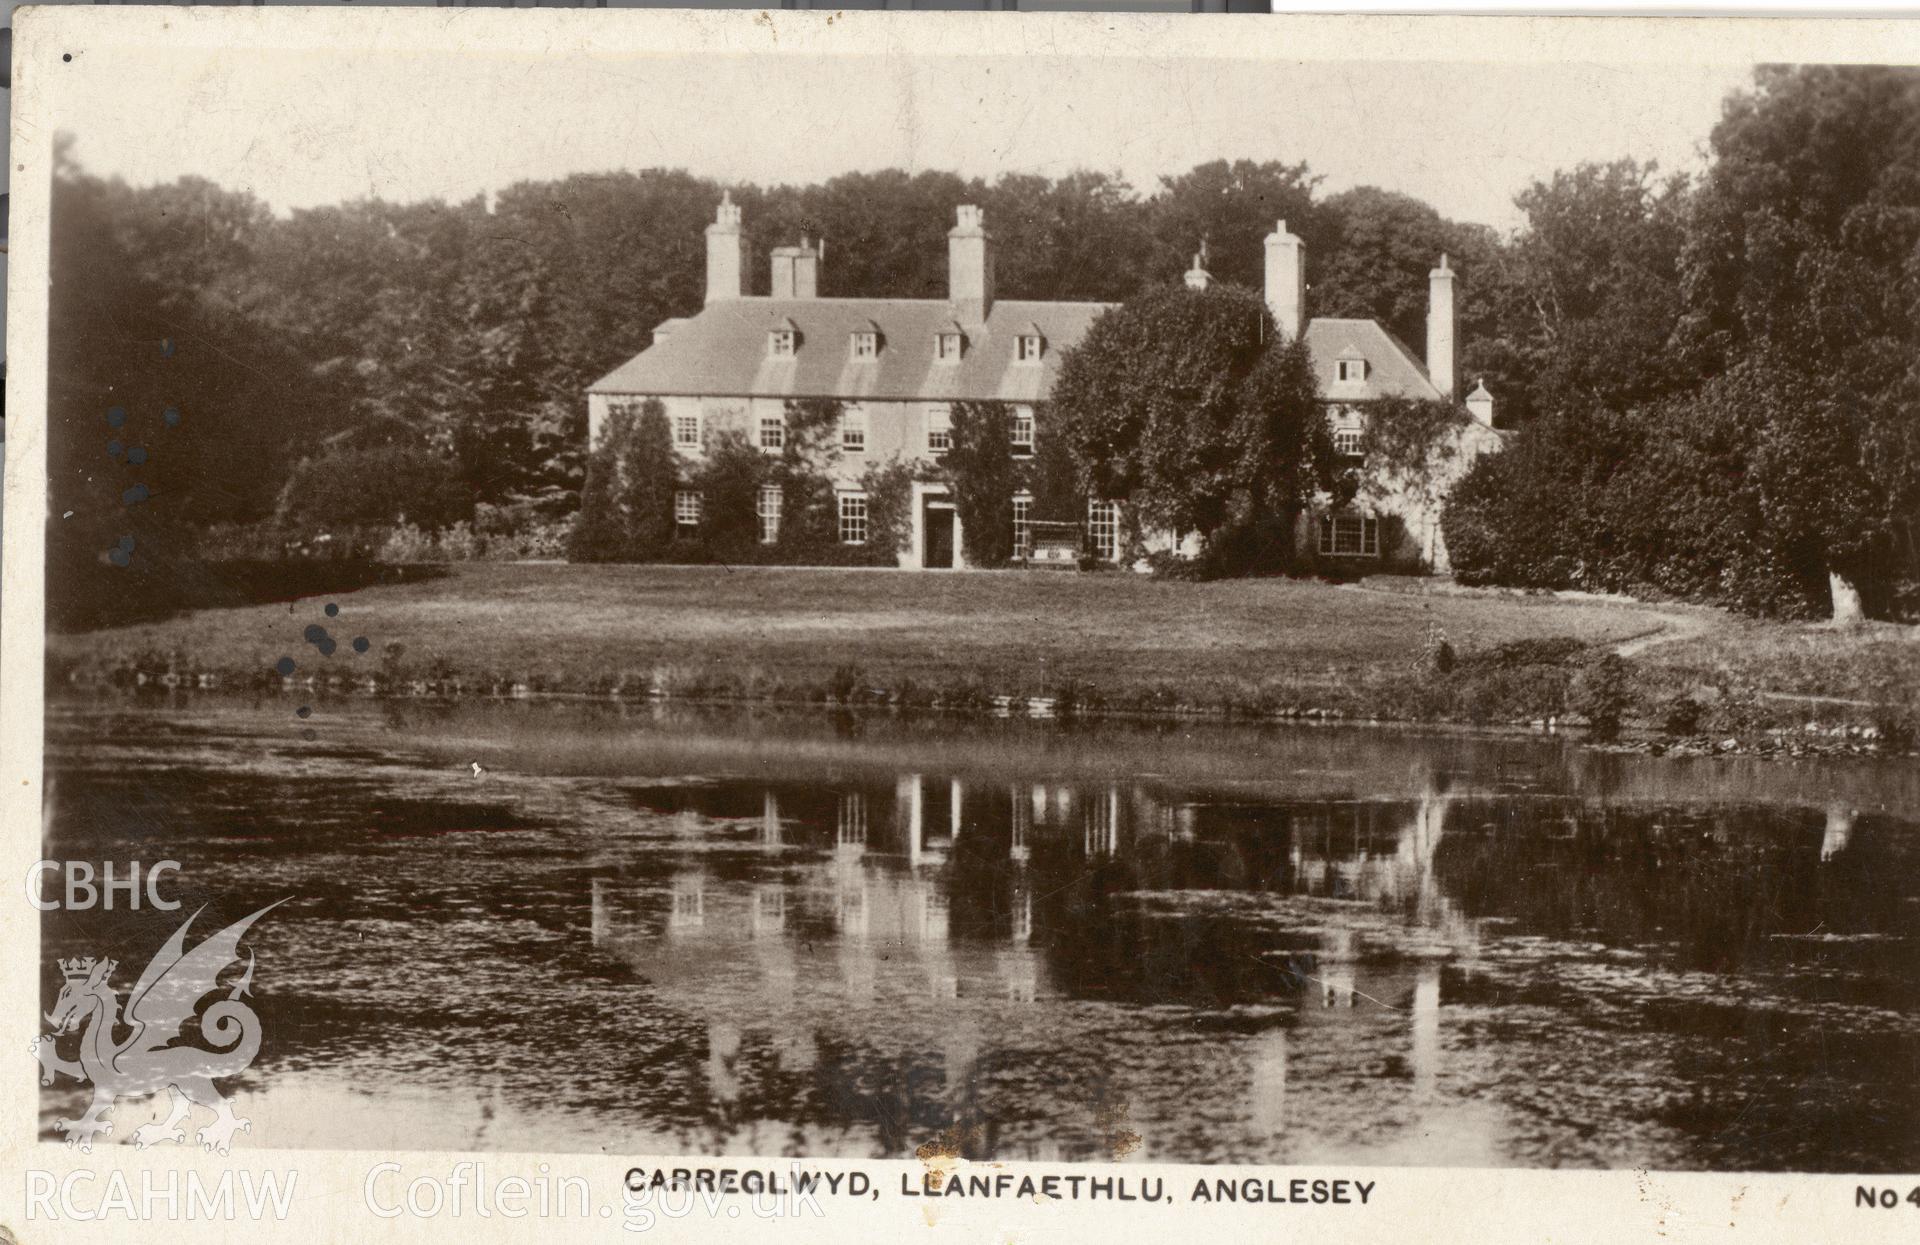 Digitised postcard image of Carreglwyd, Llanfaethlu. Produced by Parks and Gardens Data Services, from an original item in the Peter Davis Collection at Parks and Gardens UK. We hold only web-resolution images of this collection, suitable for viewing on screen and for research purposes only. We do not hold the original images, or publication quality scans.